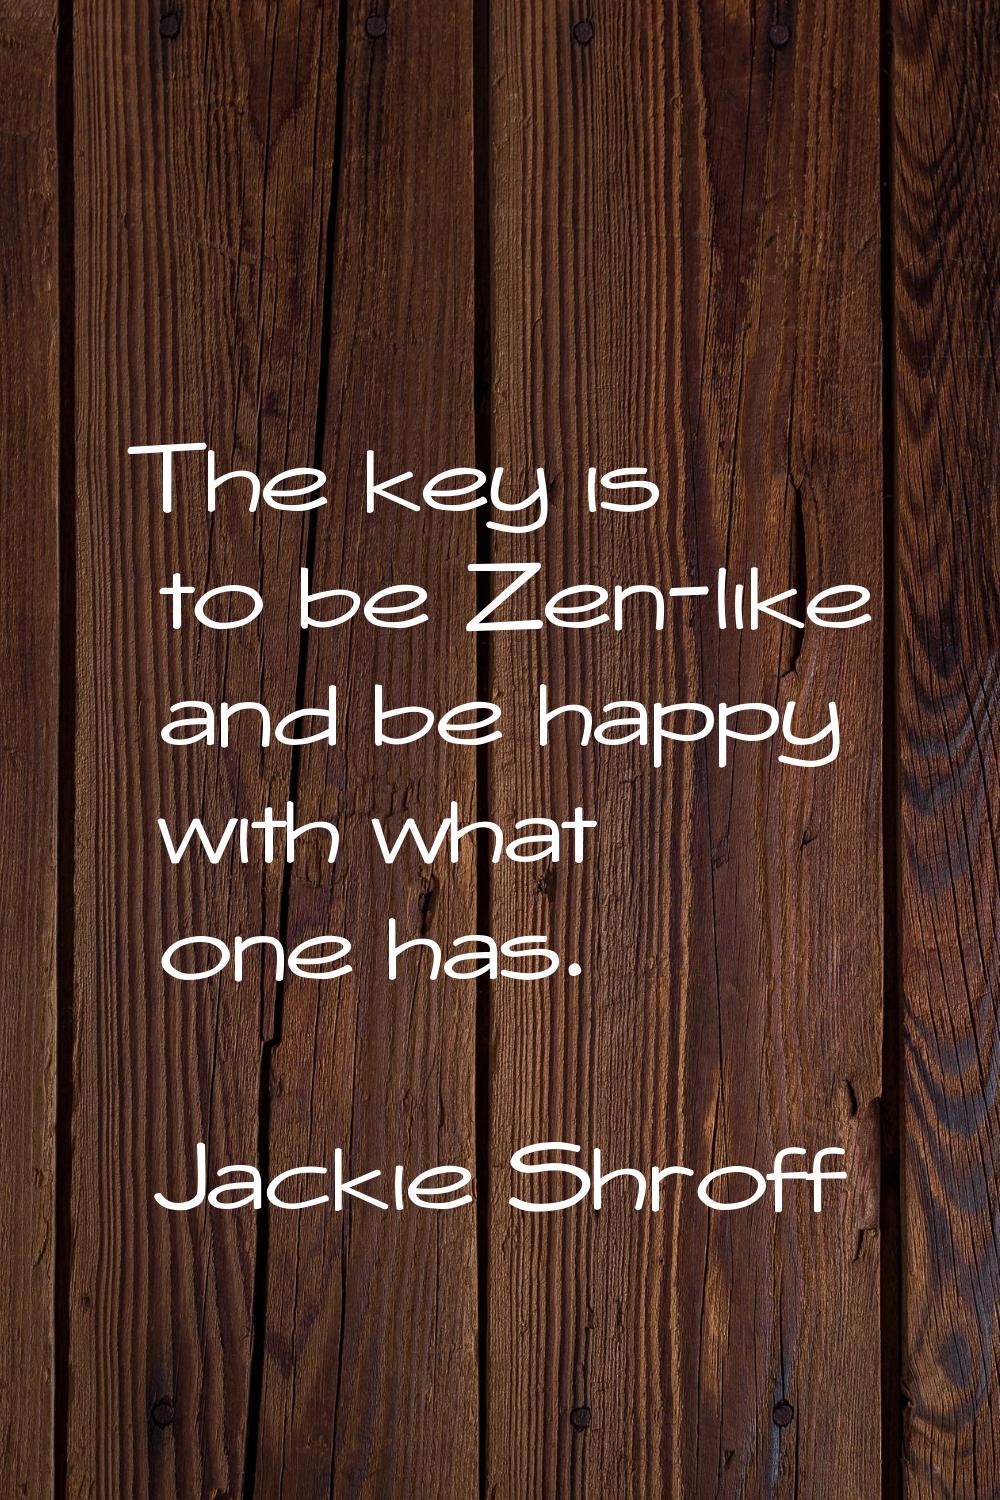 The key is to be Zen-like and be happy with what one has.